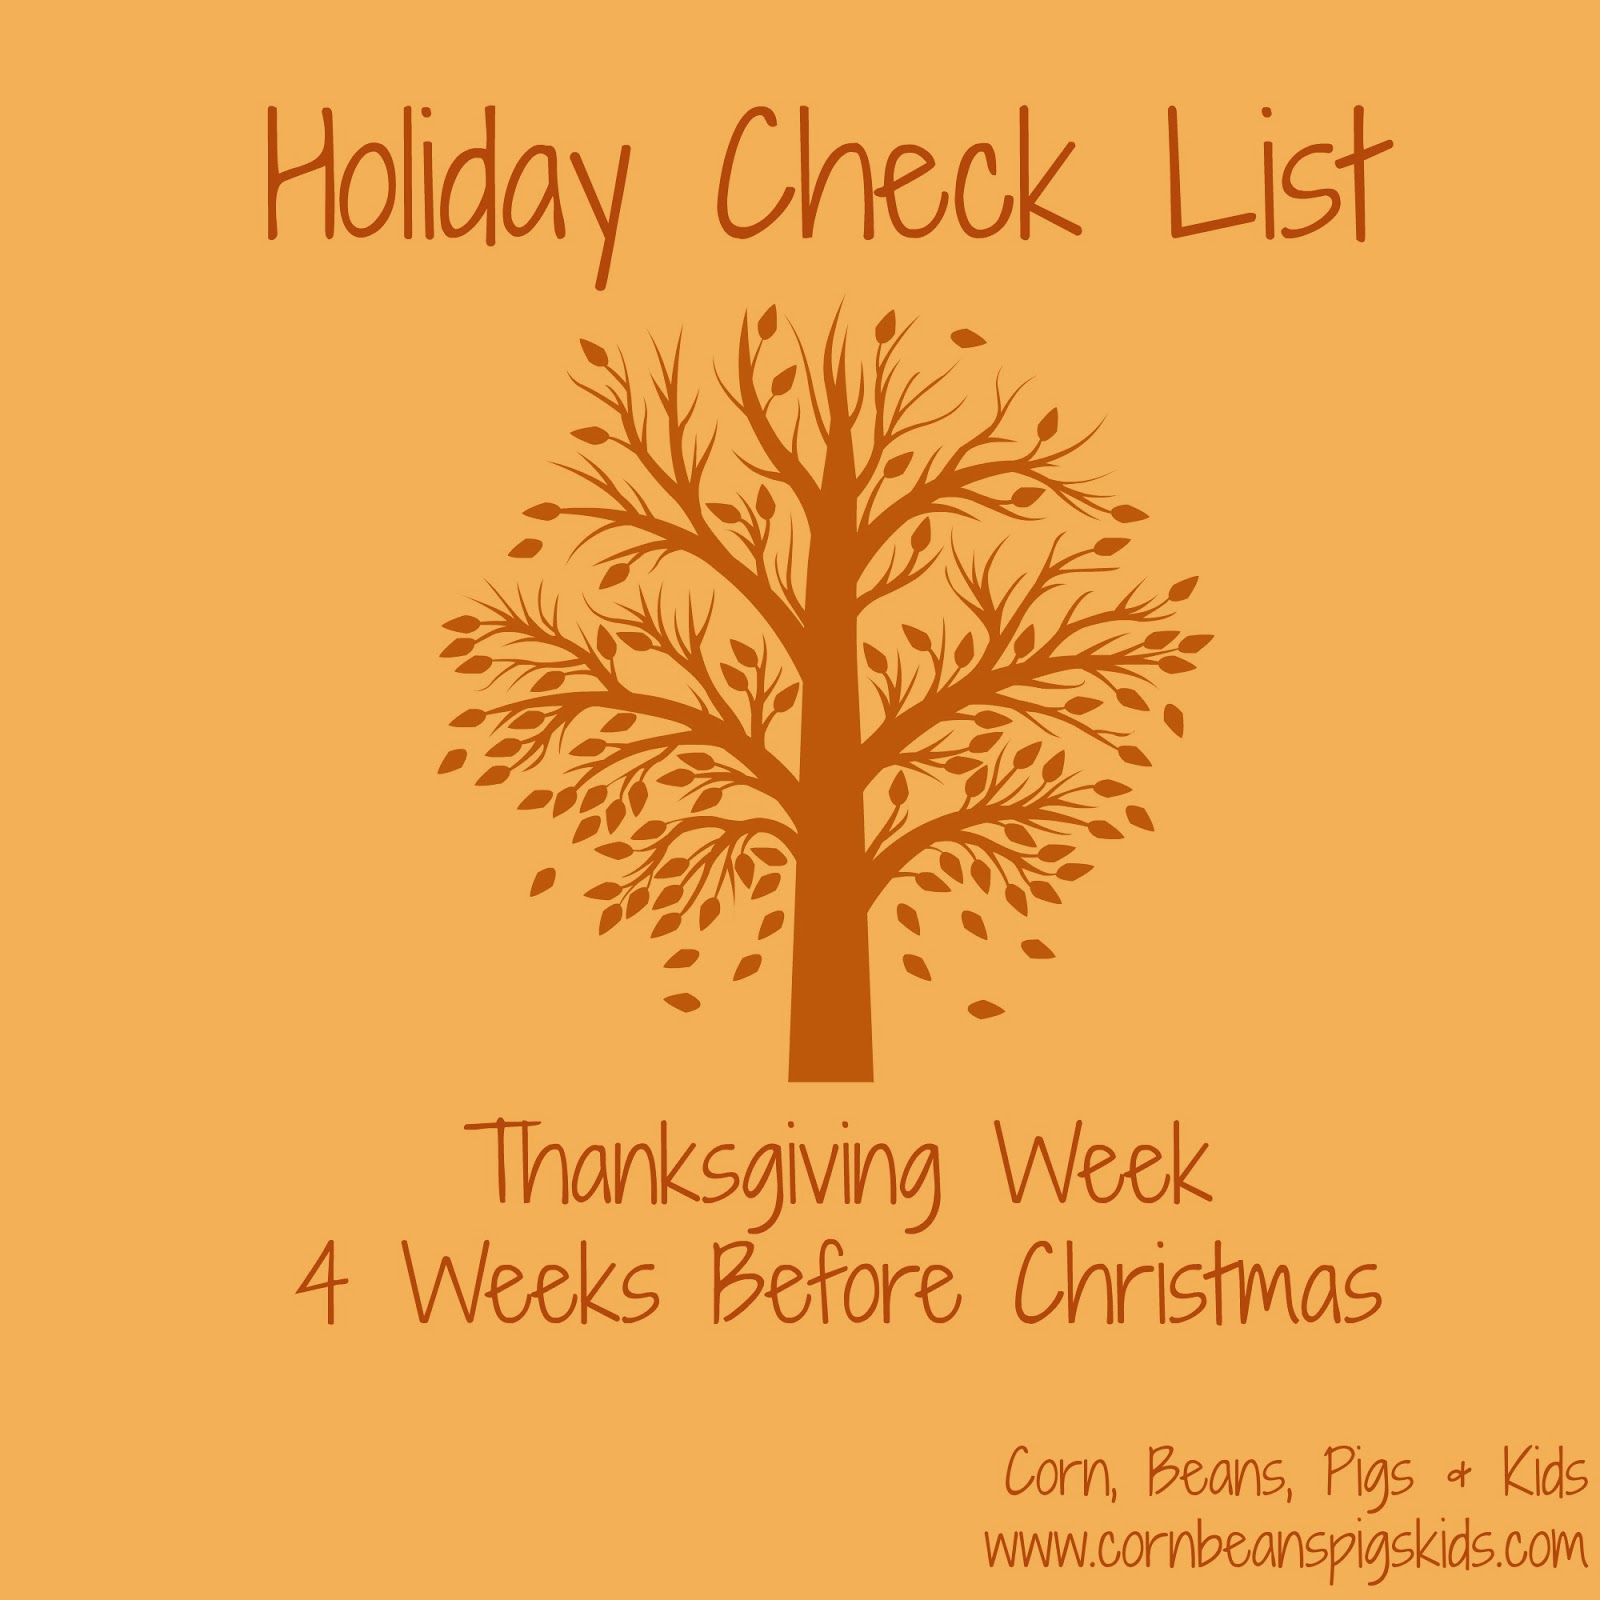 Holiday Check List - Thanksgiving Week